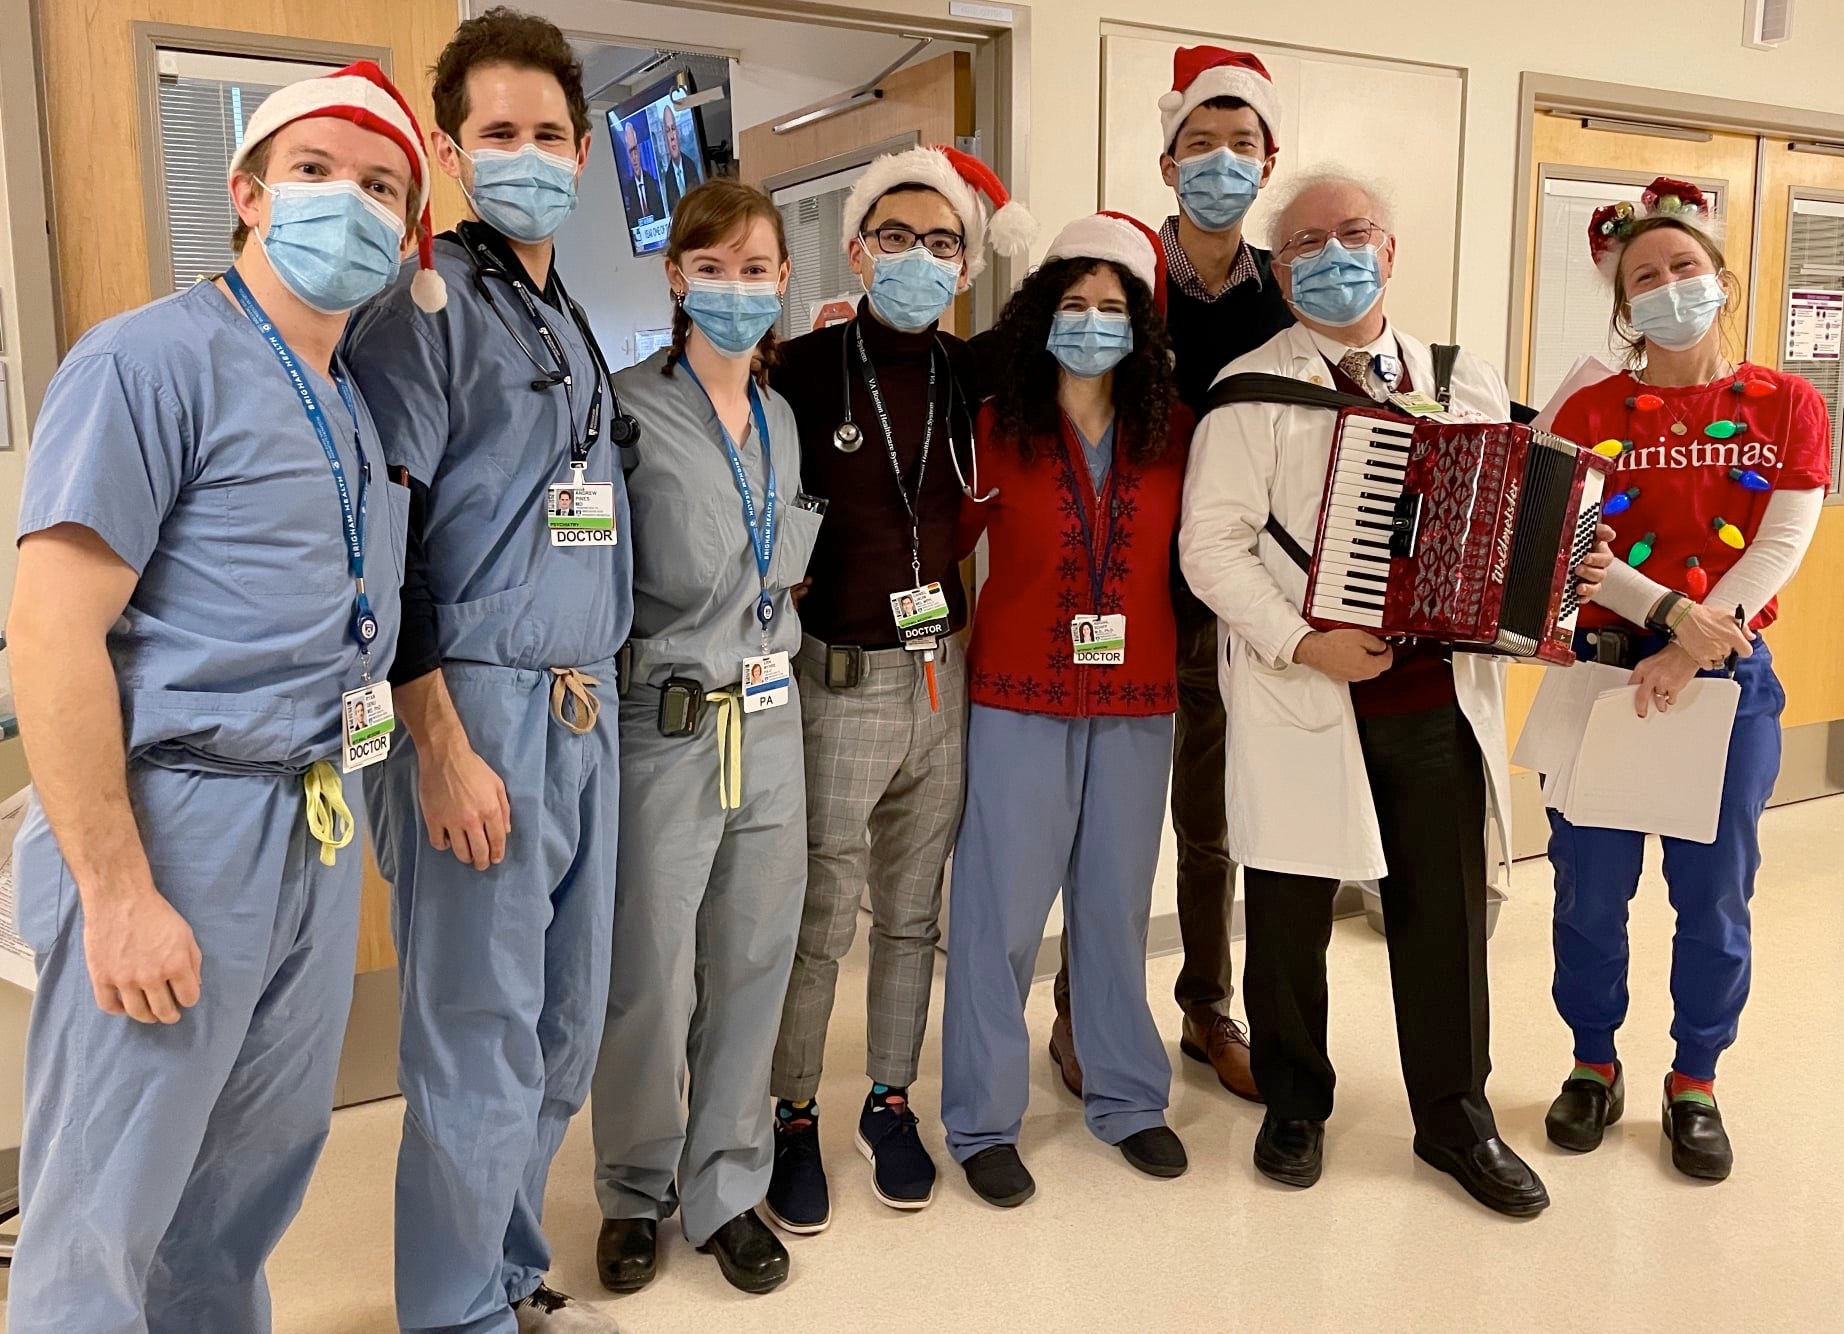 Thomas Michel with Rosie his accordion and a group of interns and residents at the “Cardiotonics” Christmas gig at Brigham and Women’s Hospital.